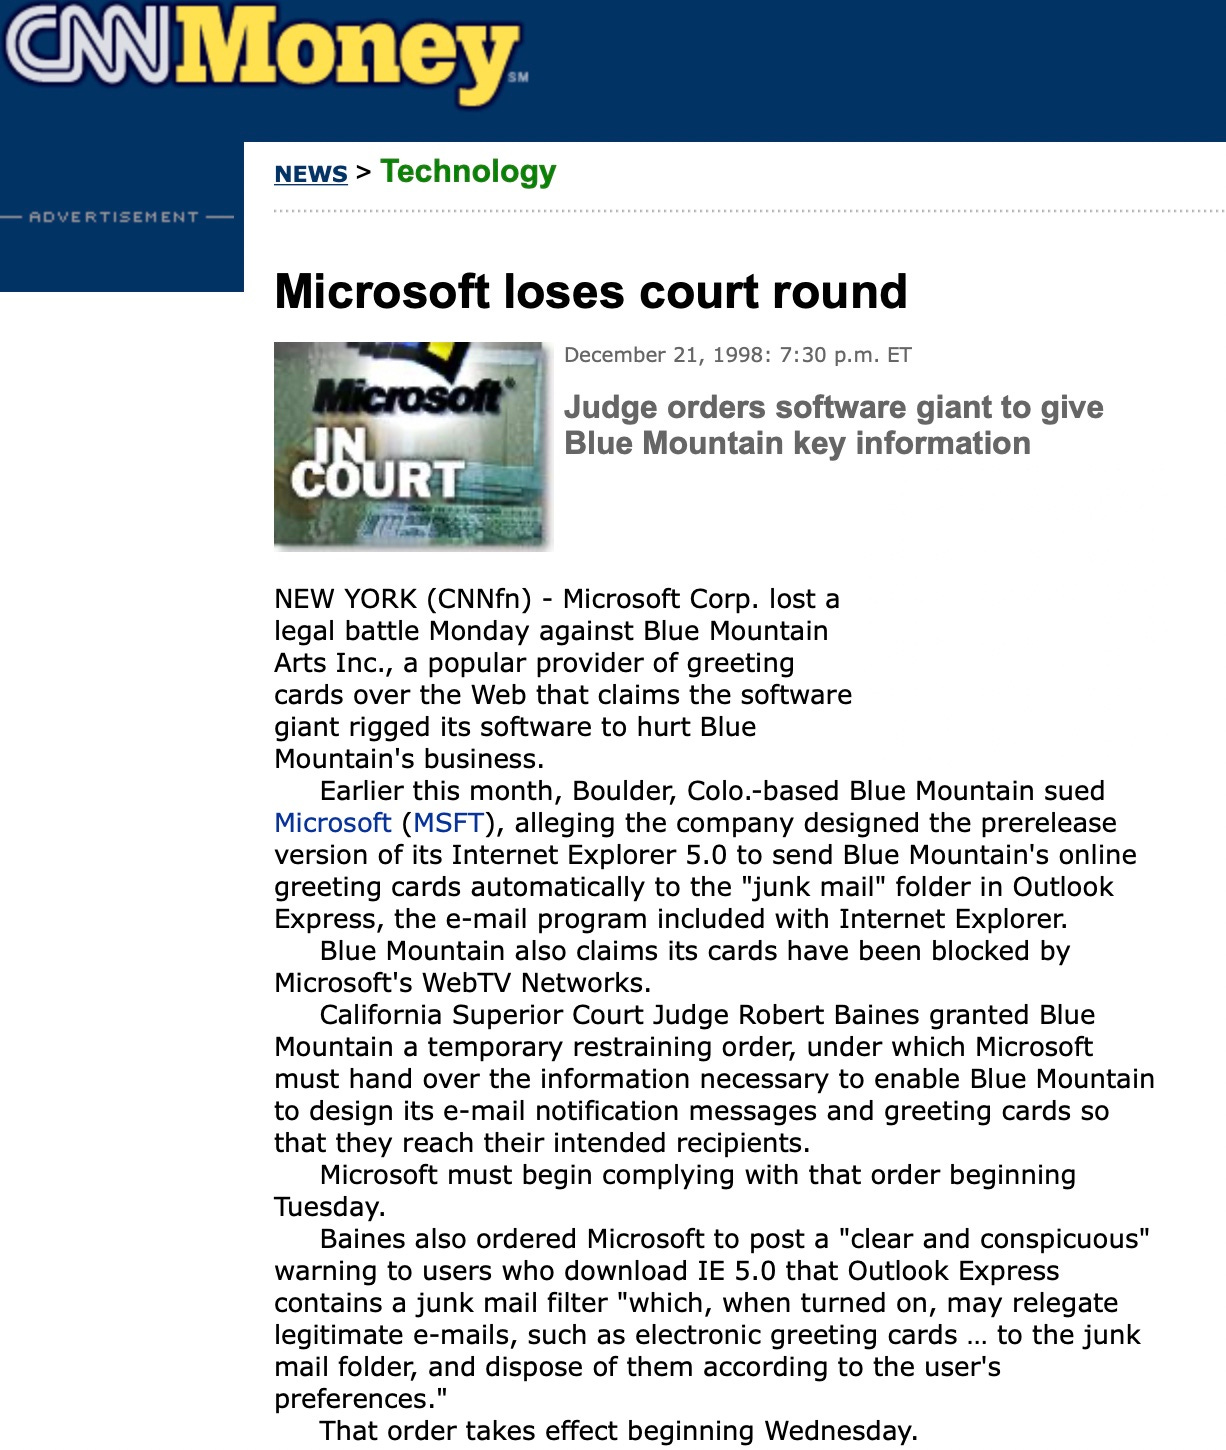 Microsoft loses court round Microsoft' cOURT December 21, 1998: 7:30 p.m. ET Judge orders software giant to give Blue Mountain key information NEW YORK (CNNfn) - Microsoft Corp. lost a legal battle Monday against Blue Mountain Arts Inc., a popular provider of greeting cards over the Web that claims the software giant rigged its software to hurt Blue Mountain's business. Earlier this month, Boulder, Colo.-based Blue Mountain sued Microsoft (MSFT), alleging the company designed the prerelease version of its Internet Explorer 5.0 to send Blue Mountain's online greeting cards automatically to the "junk mail" folder in Outlook Express, the e-mail program included with Internet Explorer. Blue Mountain also claims its cards have been blocked by Microsoft's WebTV Networks. California Superior Court Judge Robert Bains granted Blue Mountain a temporary restraining order, under which Microsoft must hand over the information necessary to enable Blue Mountain to design its e-mail notification messages and greeting cards so that they reach their intended recipients. Microsoft must begin complying with that order beginning Tuesday. Baines also ordered Microsoft to post a "clear and conspicuous" warning to users who download IE 5.0 that Outlook Express contains a junk mail filter "which, when turned on, may relegate legitimate e-mails, such as electronic greeting cards ... to the junk mail folder, and dispose of them according to the user's preferences. That order takes effect beginning Wednesday.